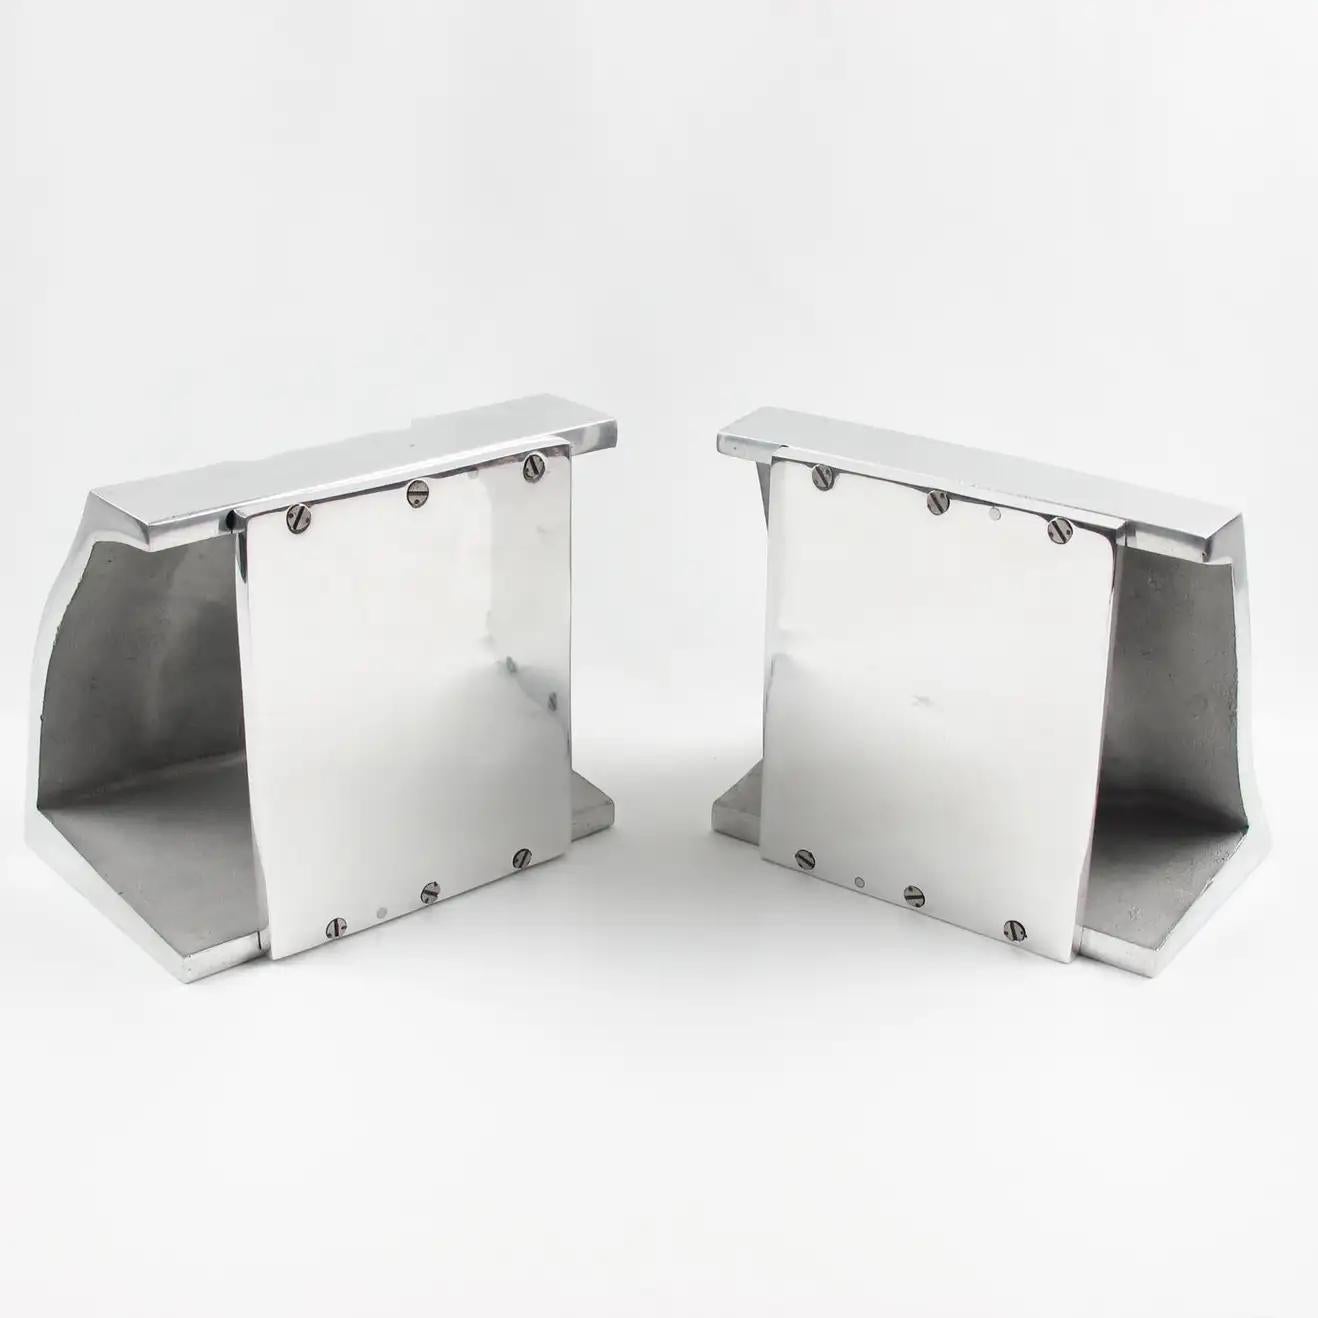 Industrial Stainless Steel Hand Mold Sculpture Bookends, a Pair For Sale 1